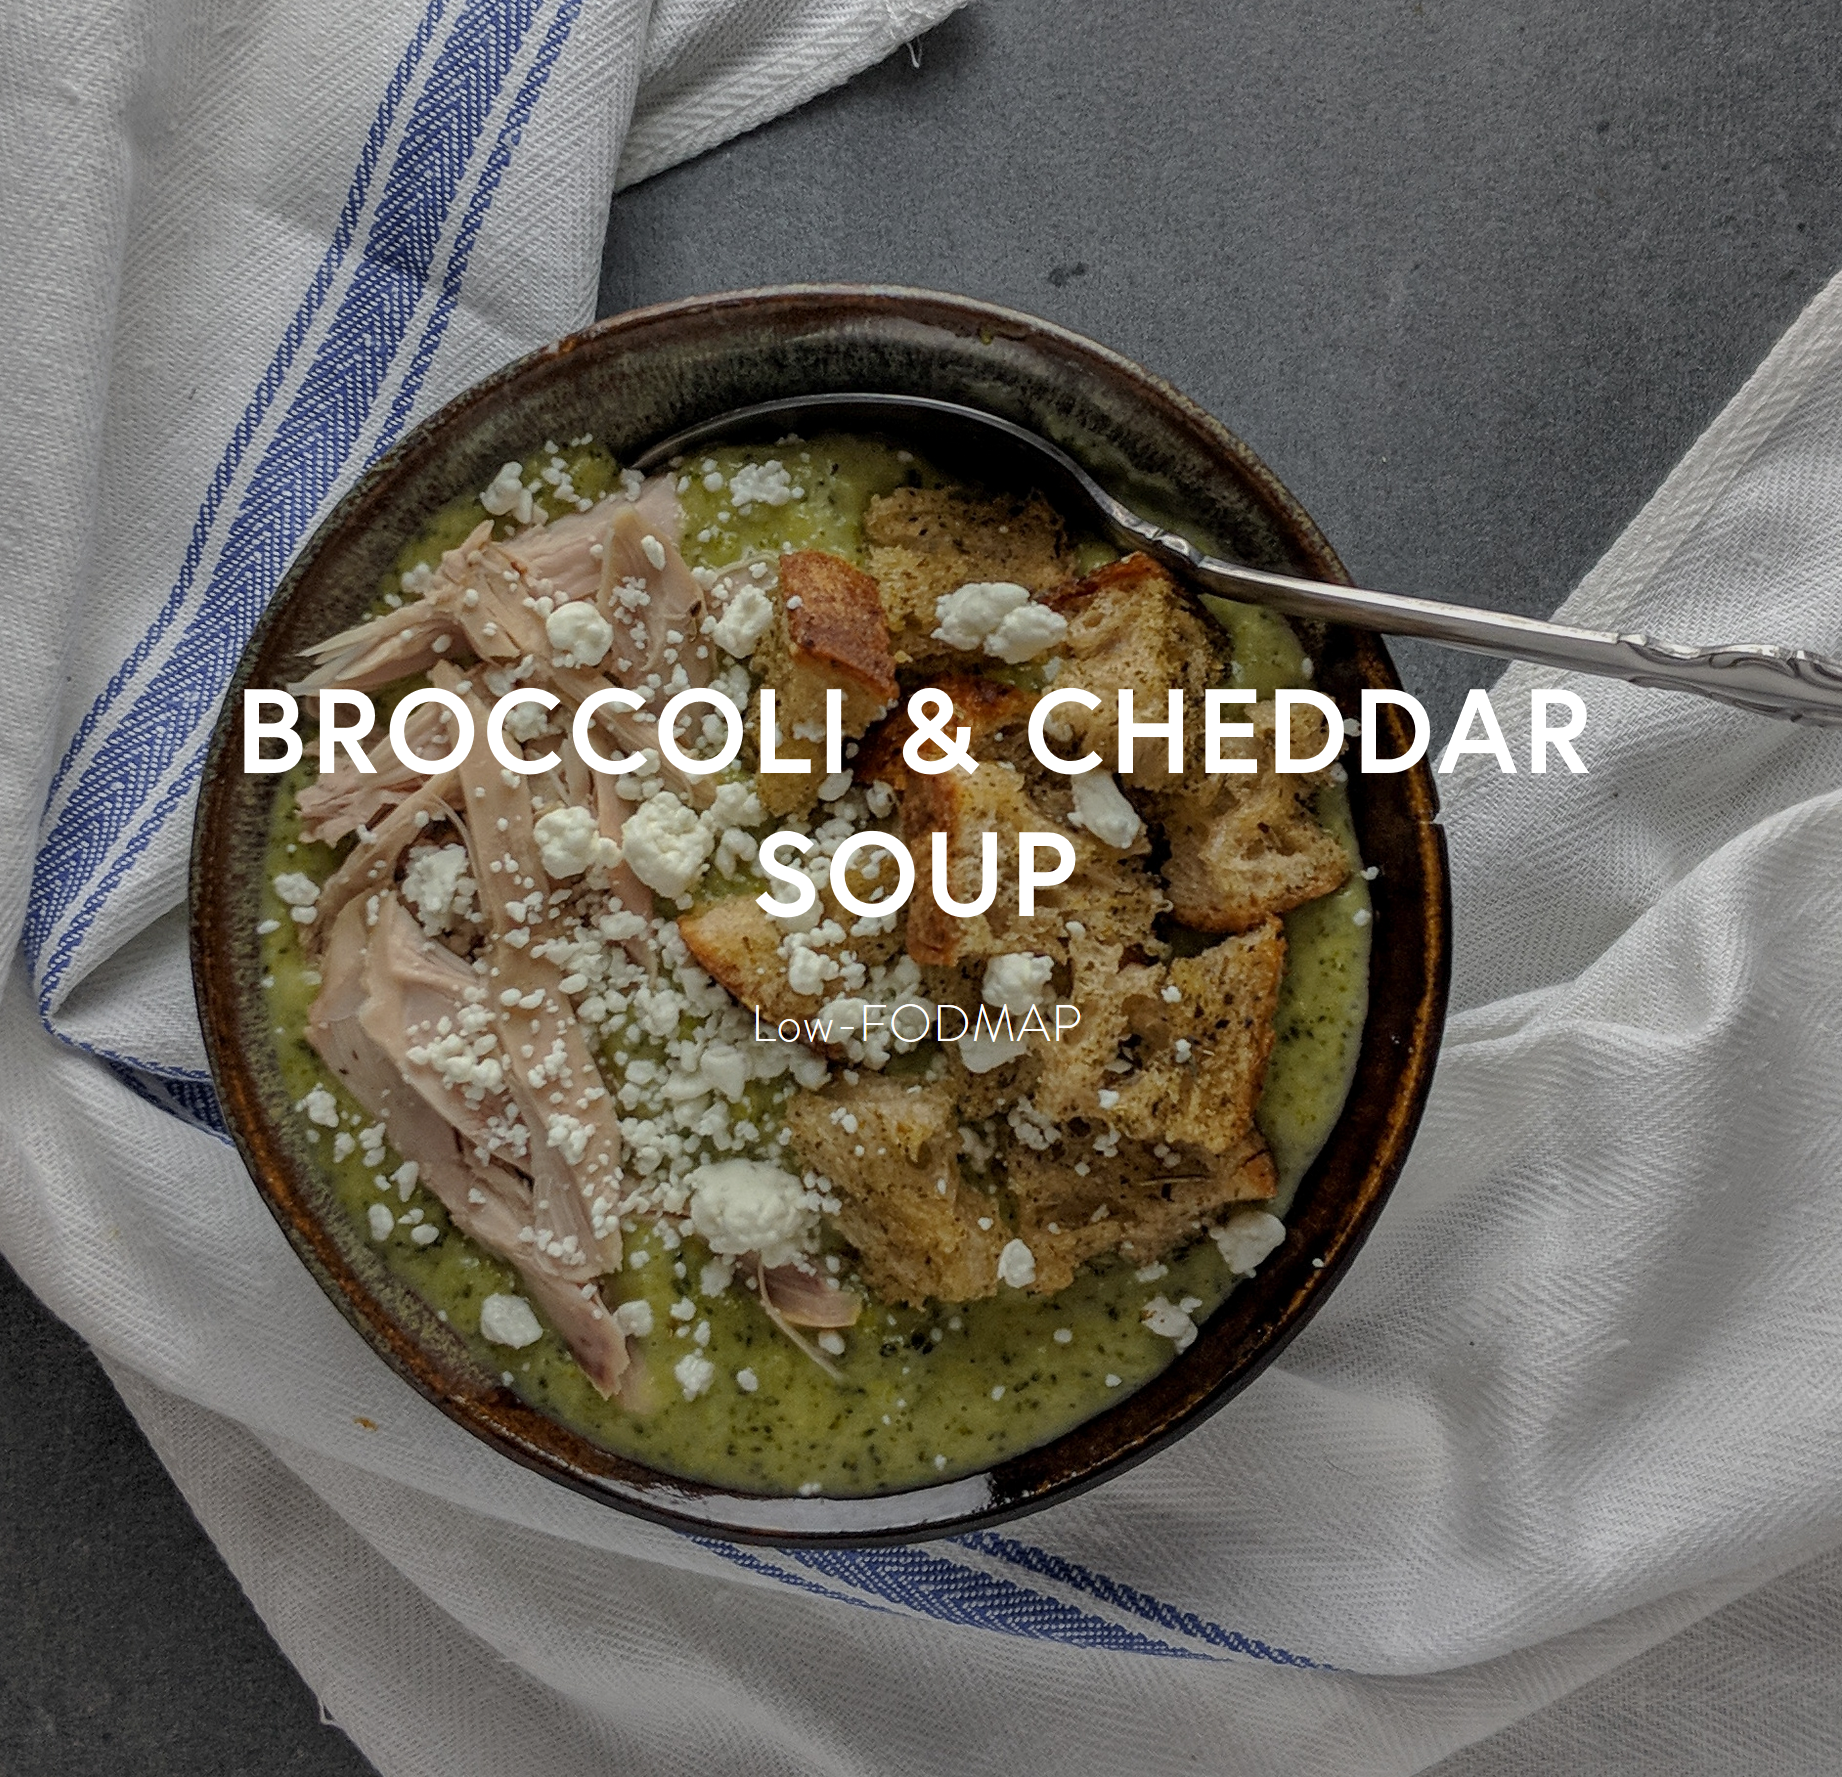 Low-FODMAP Broccoli and Cheddar Soup